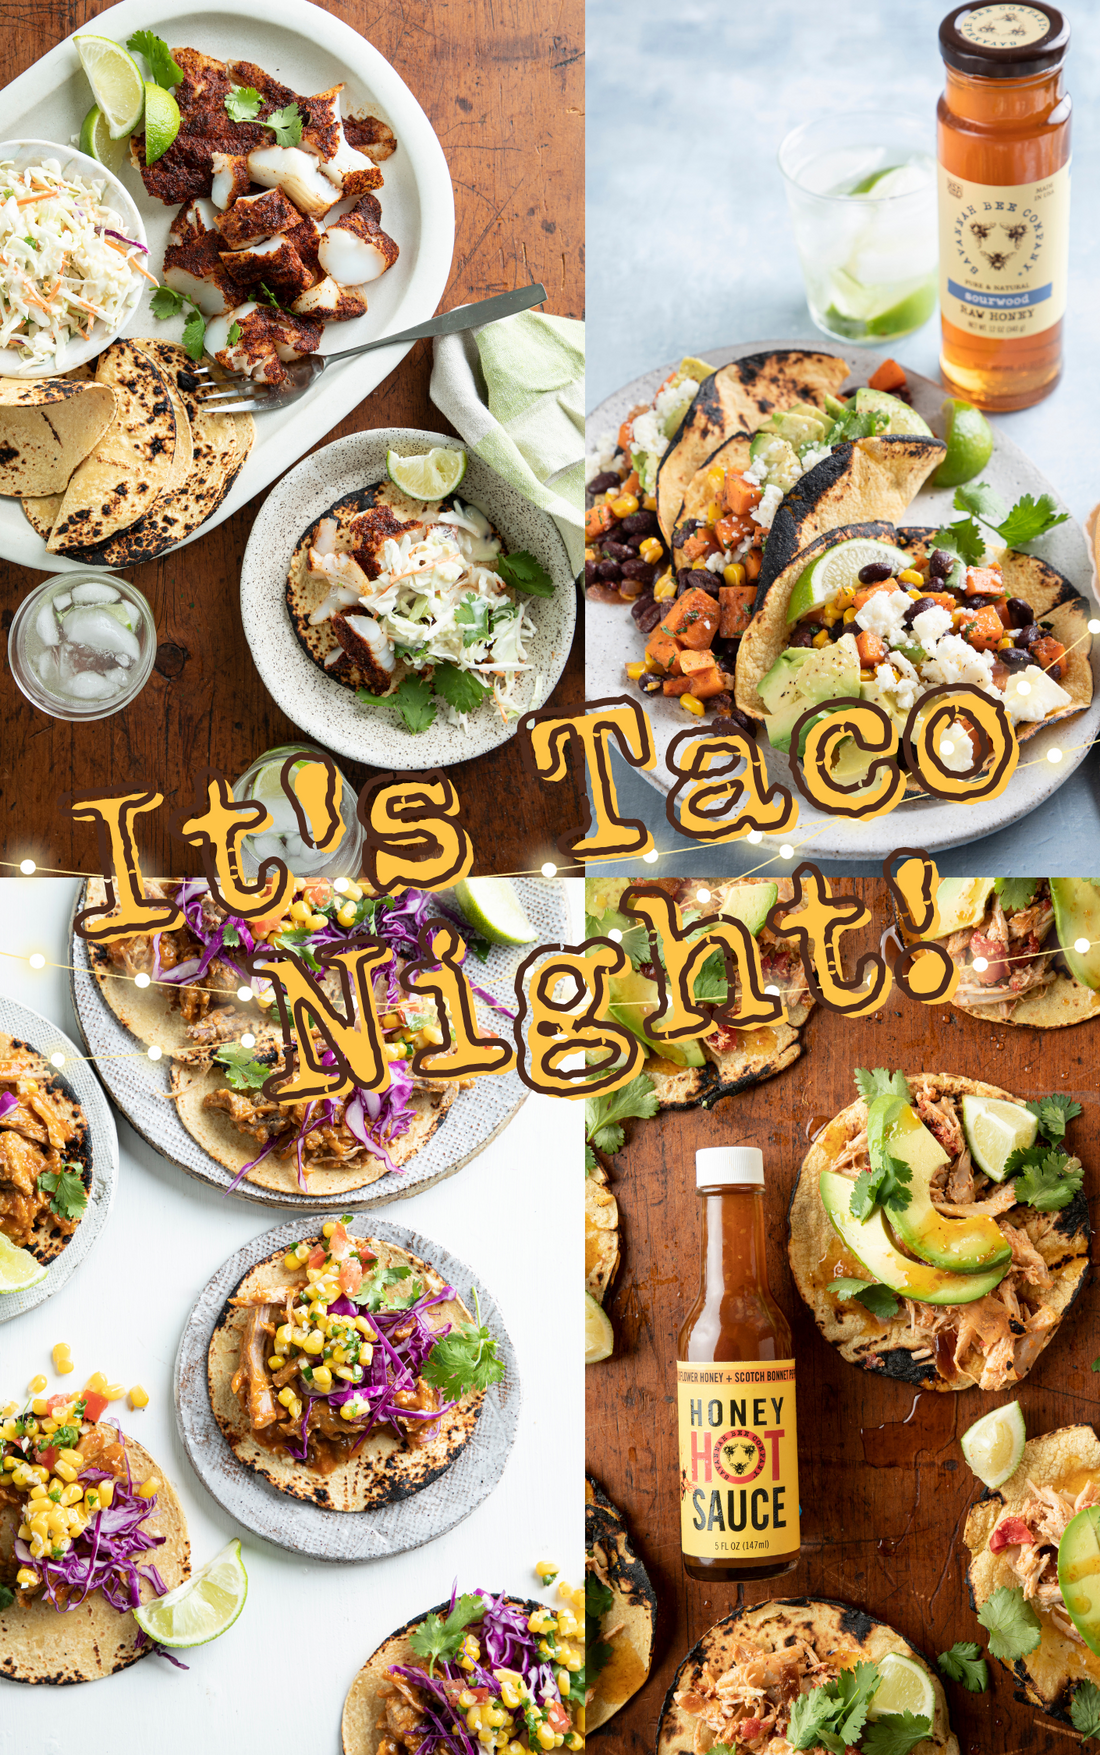 A mash up of tacos recipes for taco night or taco tuesday!